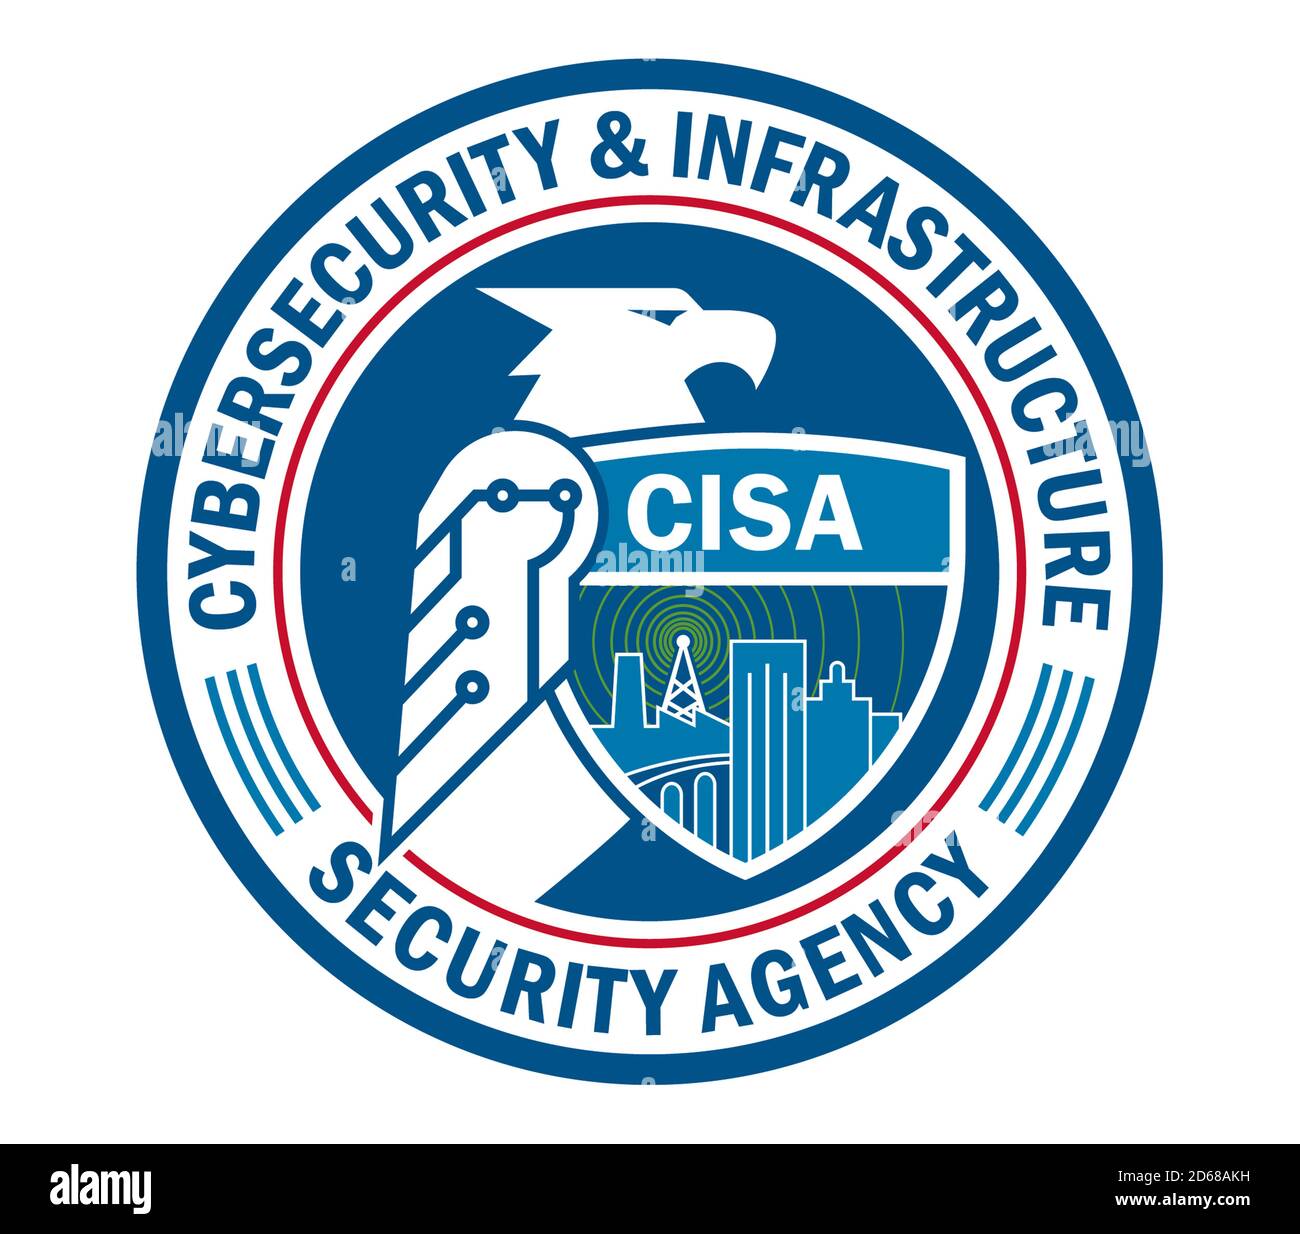 Cybersecurity and Infrastructure Security Agency Stockfoto